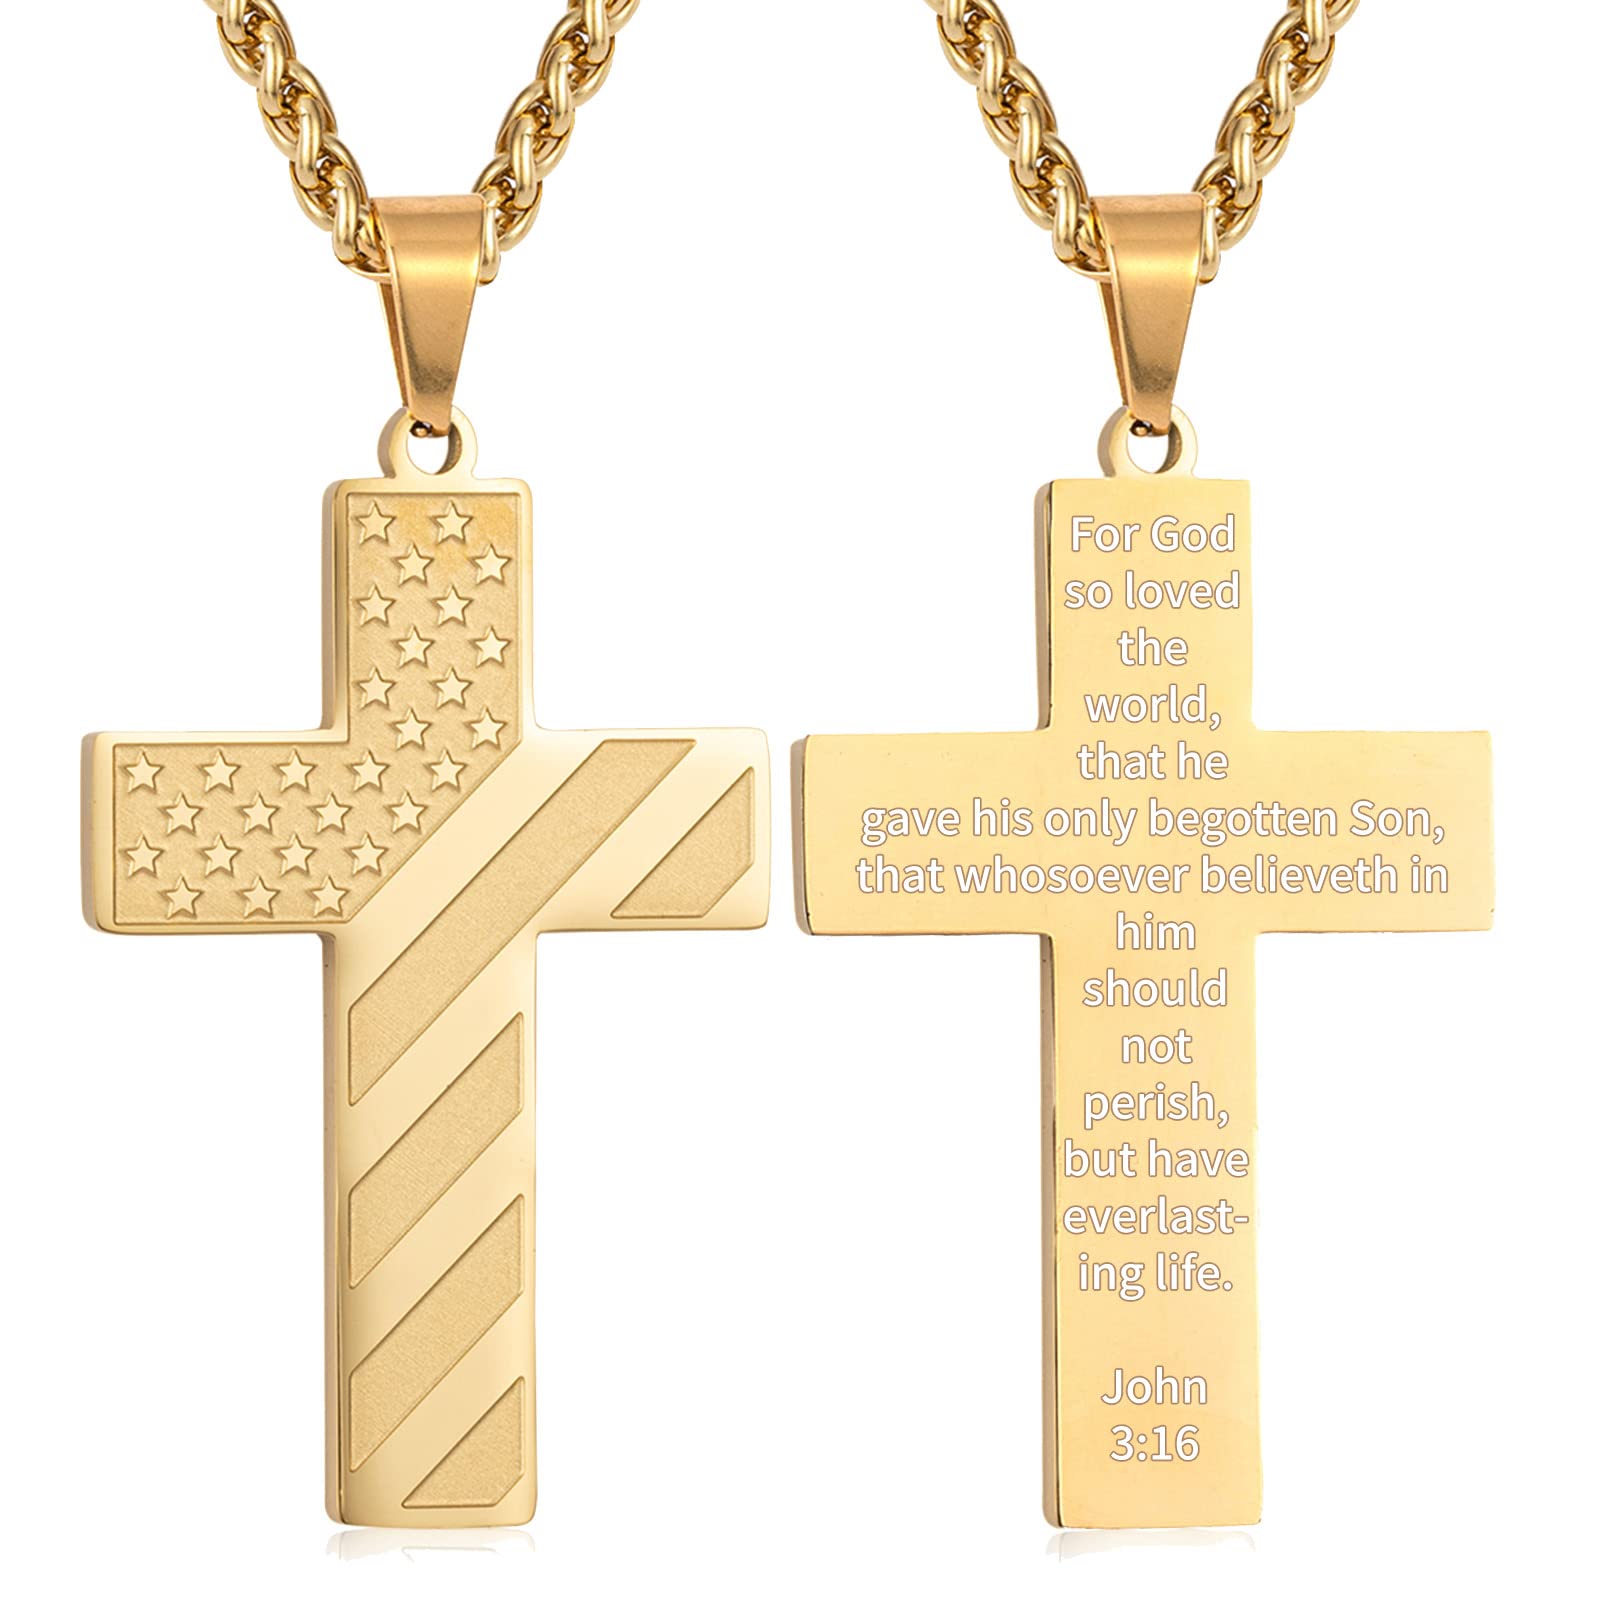 DuoDiner Gold Cross Necklace for Boys Men Pendant Chain Stainless Steel American Flag John 3:16 Bible Verse Religious Jewelry Gi